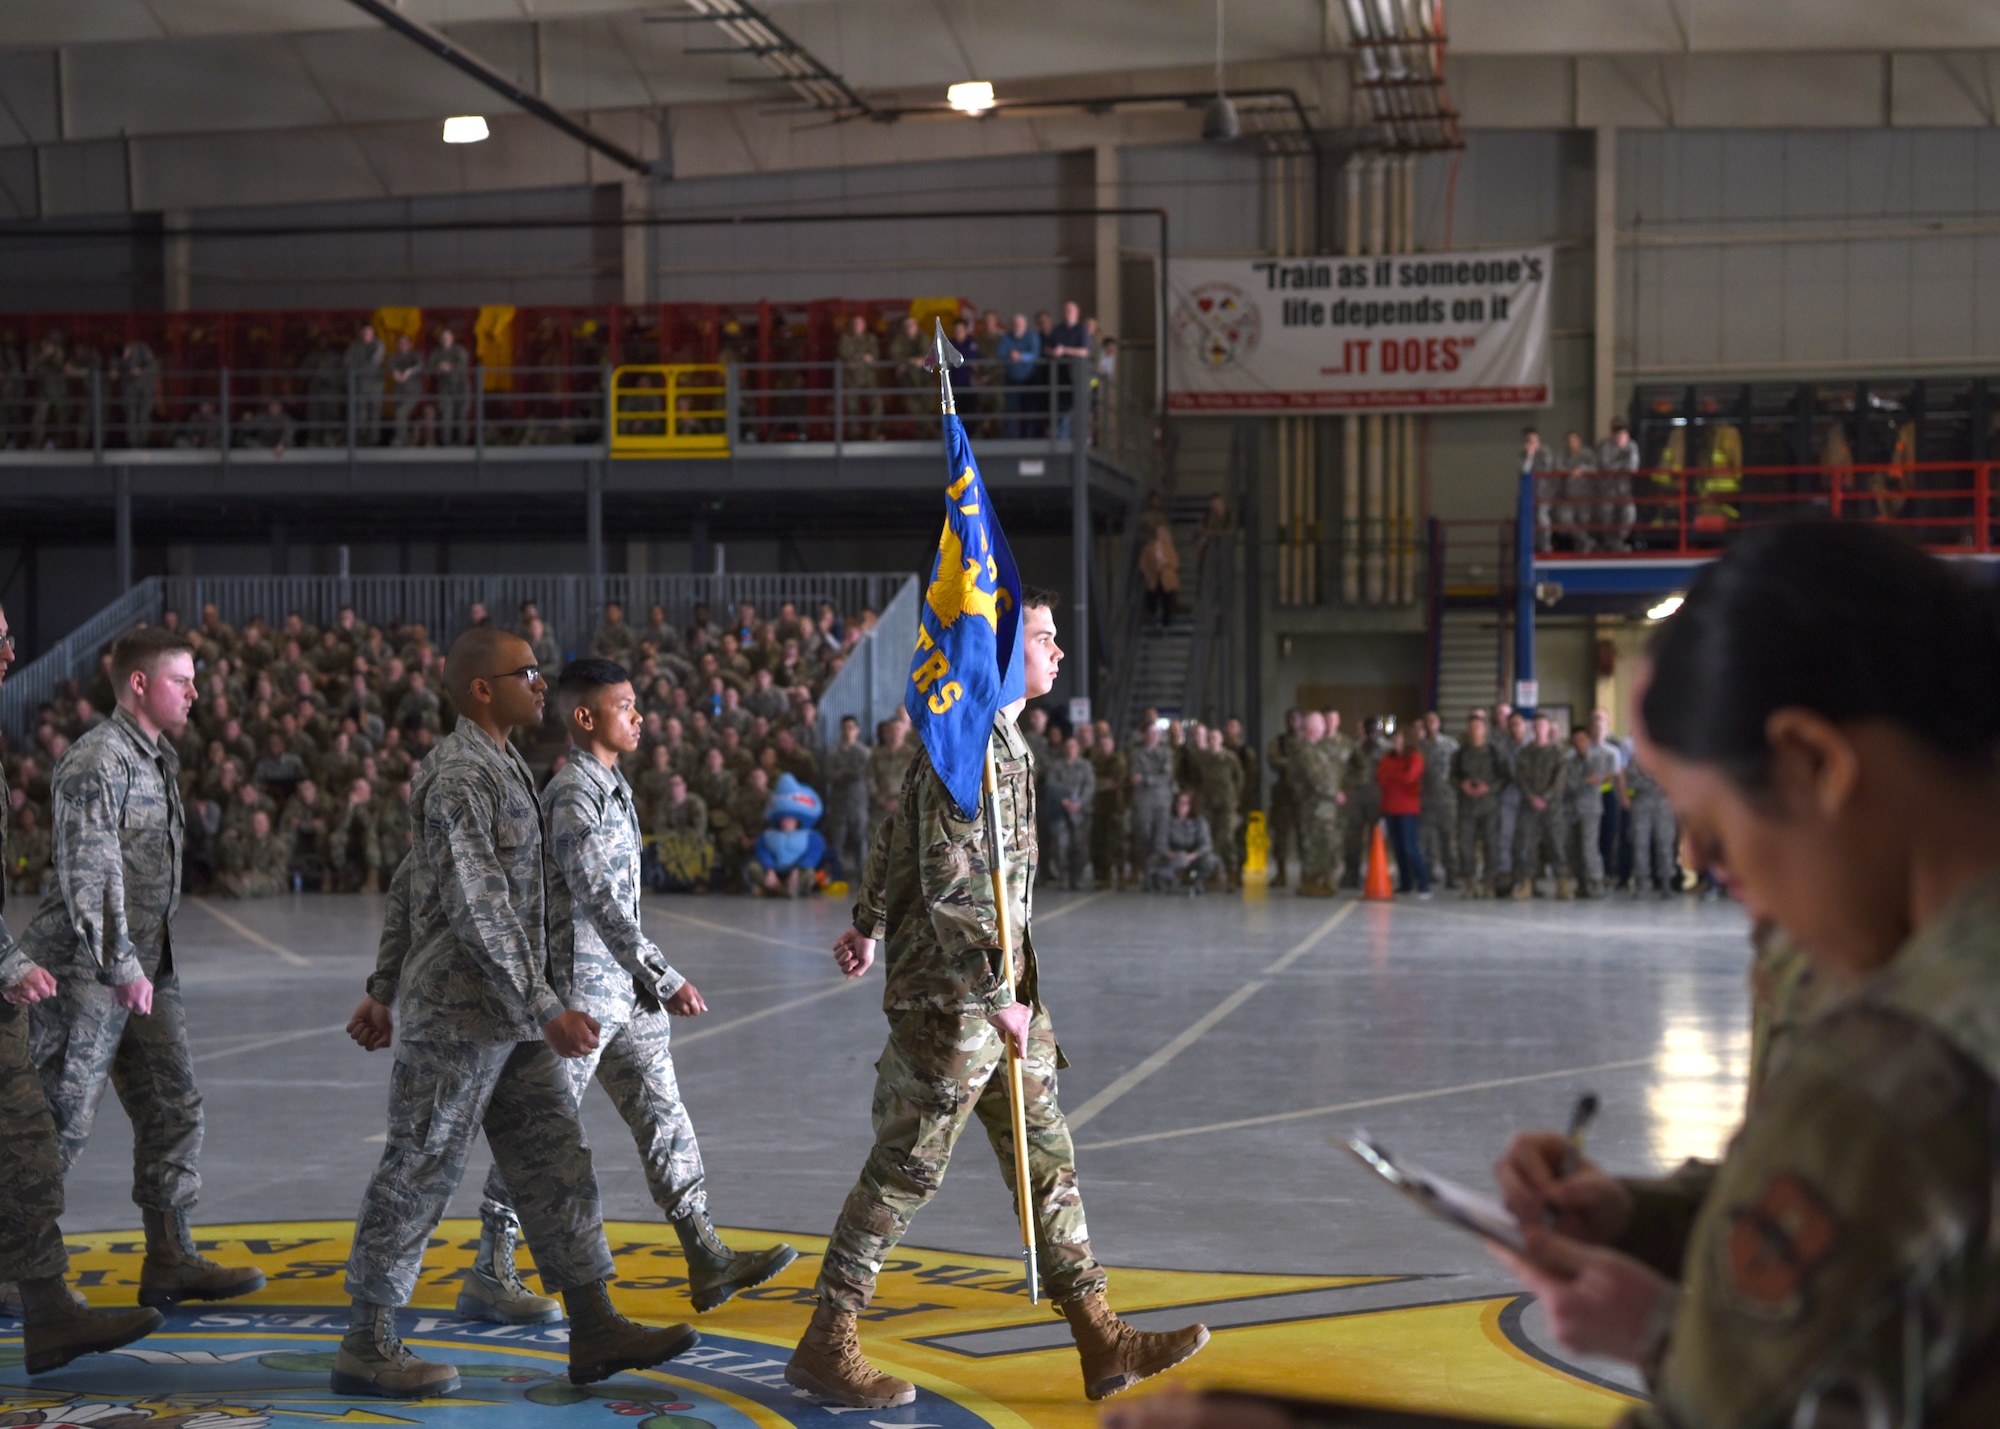 U.S. Air Force students from the 316th Training Squadron march during the 17th Training Group Drill Competition at the Louis F. Garland Department of Defense Fire Academy High Bay on Goodfellow Air Force Base, Texas, Feb. 7, 2020. The competing squadrons were judged based on military bearing, drill movement and executing precision. (U.S. Air Force photo by Airman 1st Class Abbey Rieves)